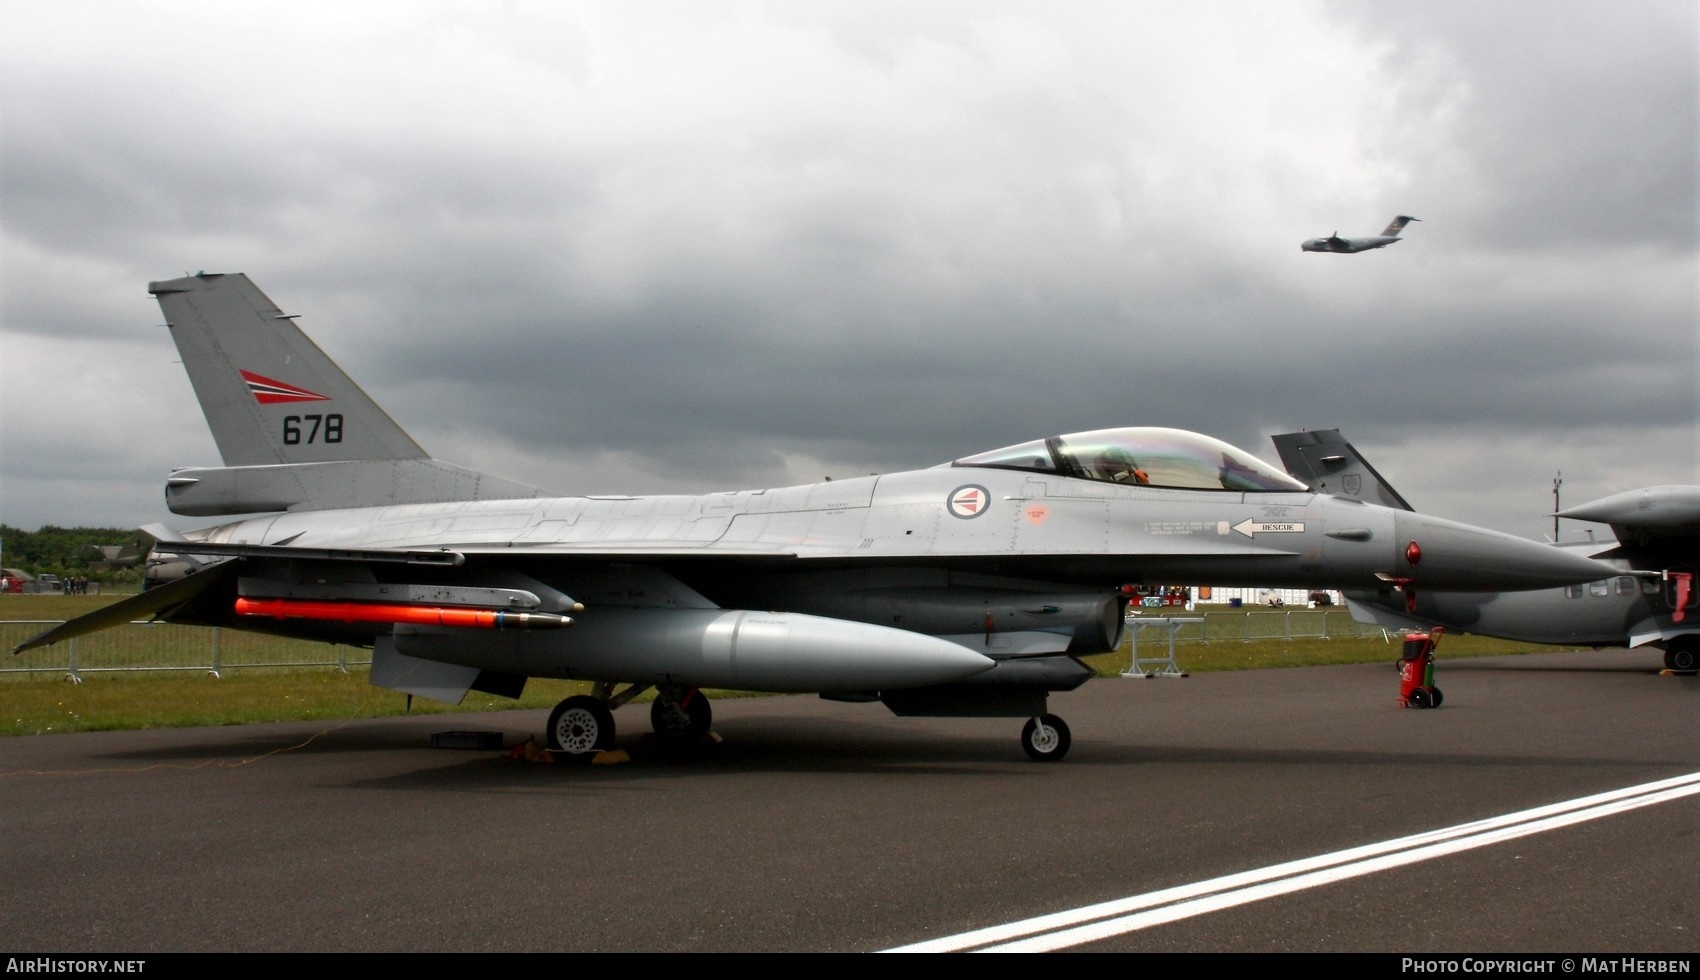 aircraft-photo-of-678-general-dynamics-f-16am-fighting-falcon